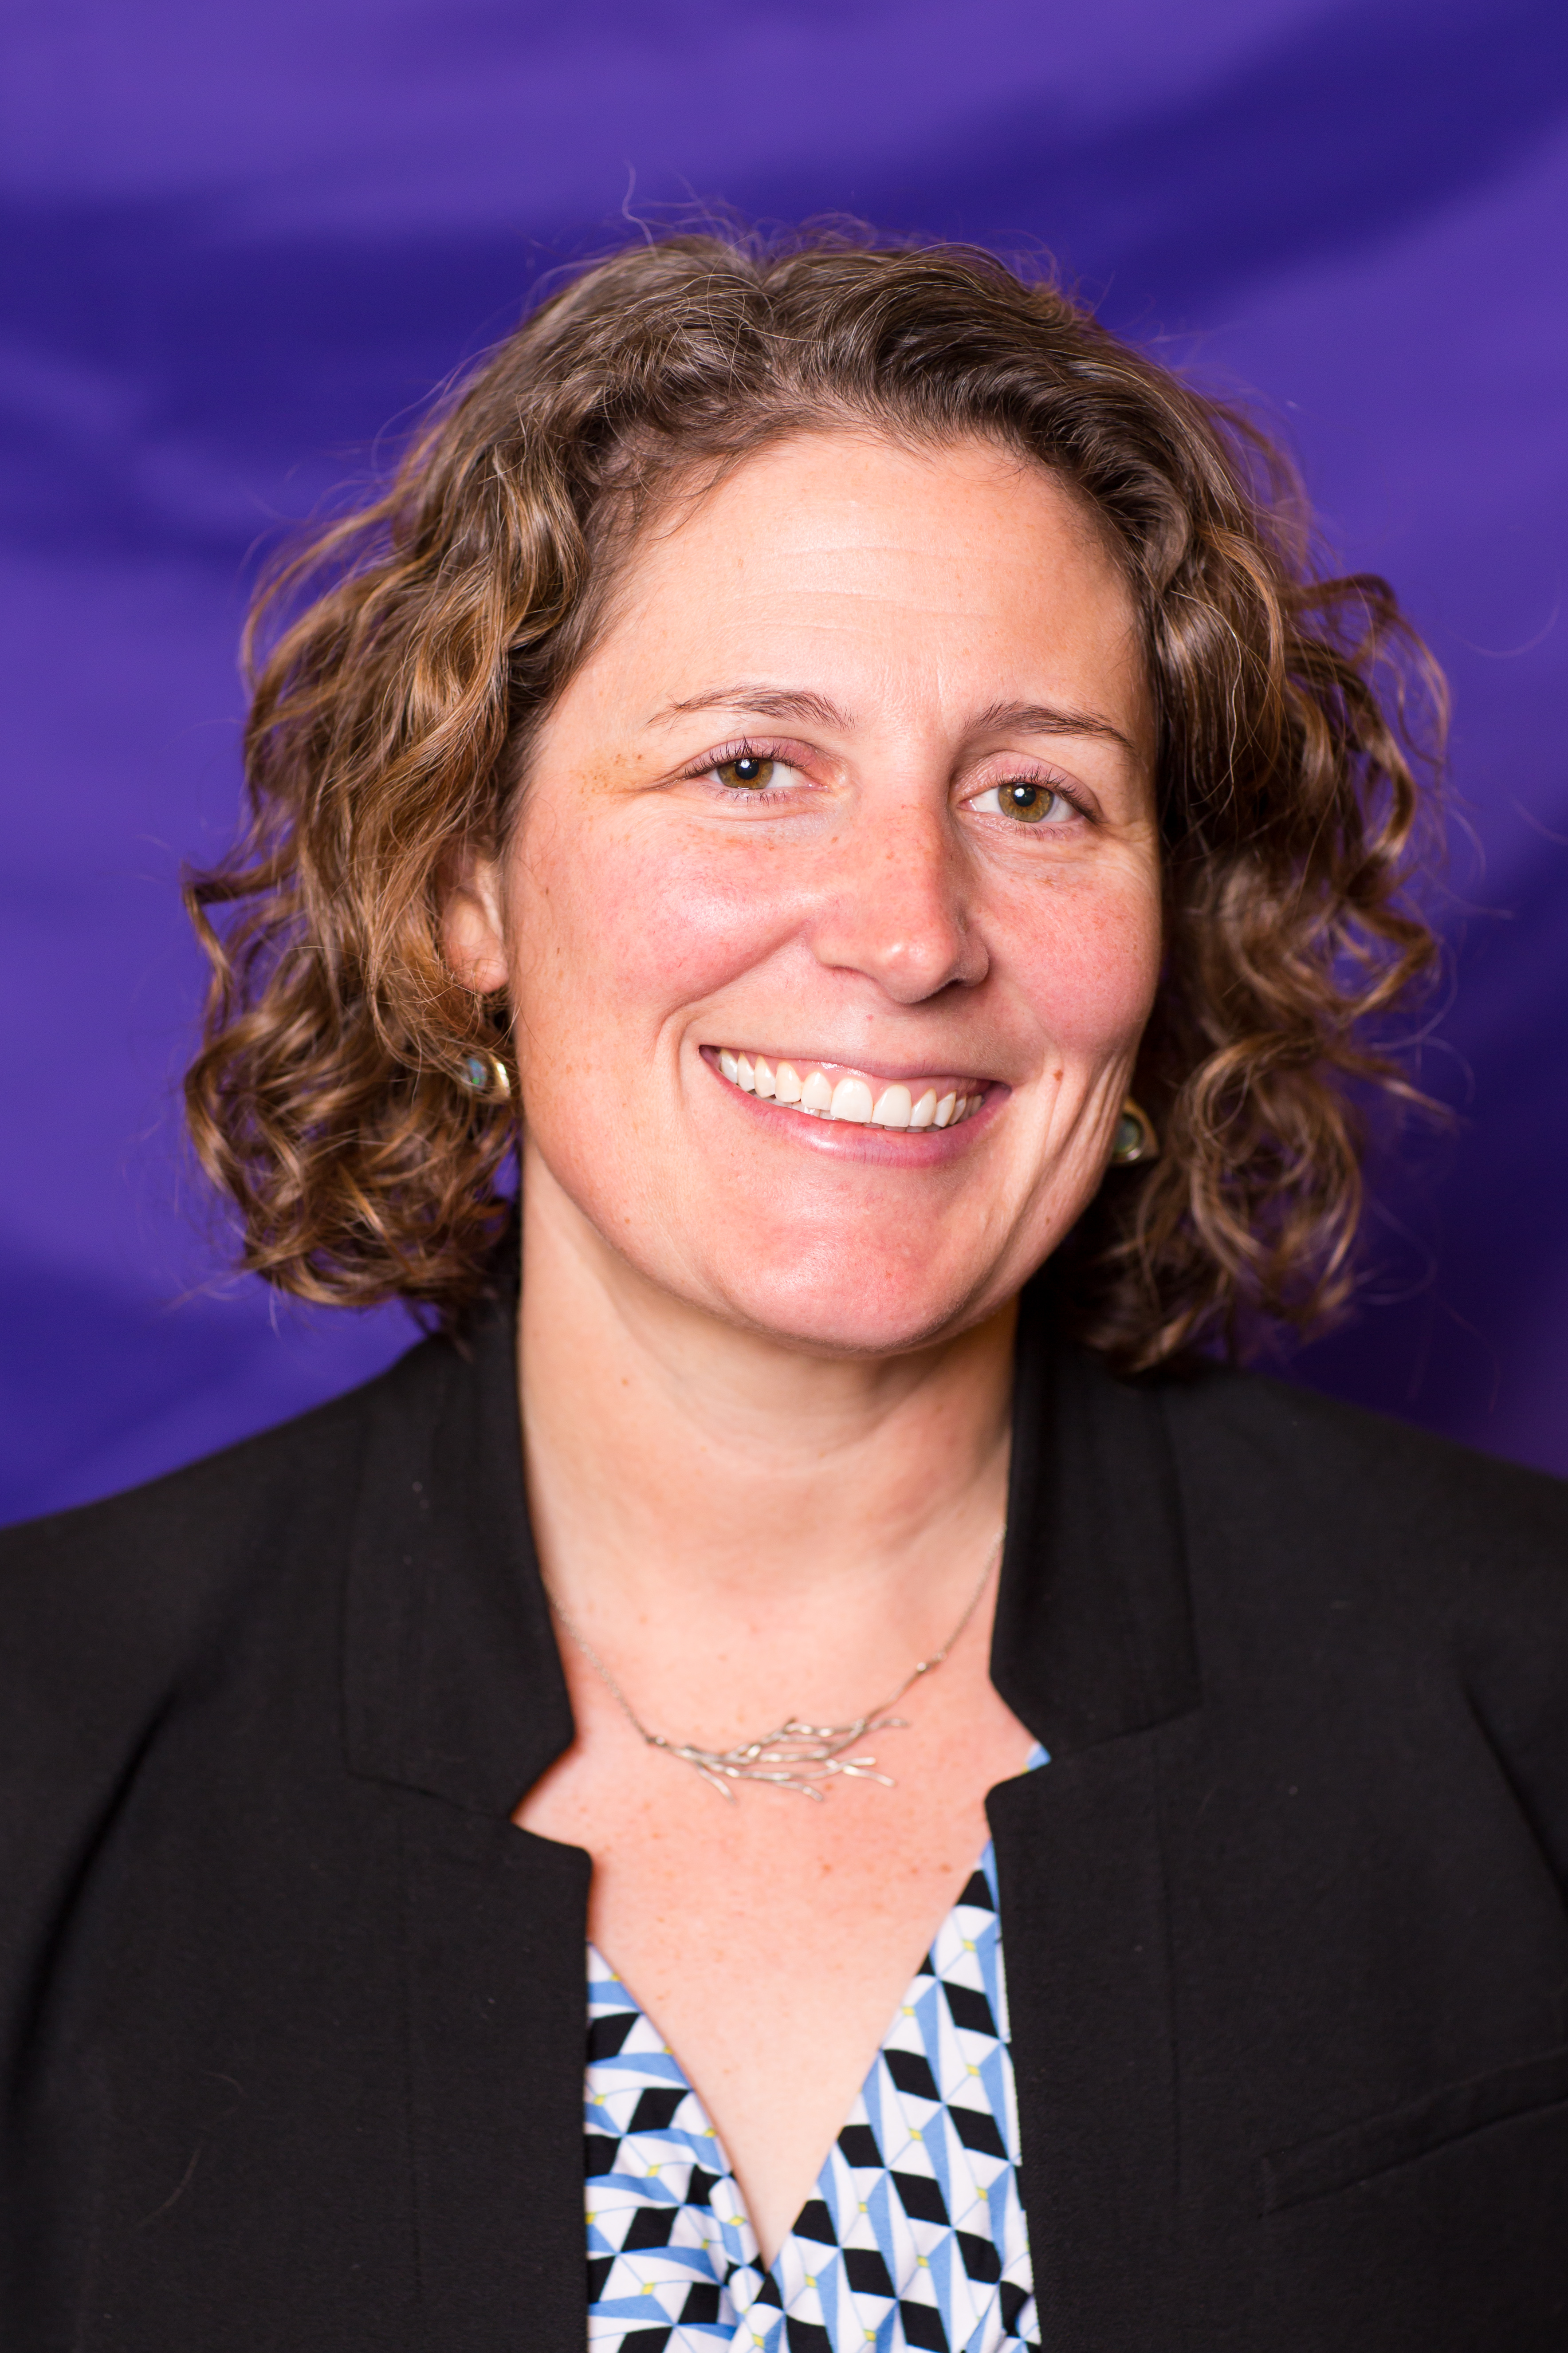 photo of a white woman with curly, light-brown hair, smiling in front of a purple backdrop 